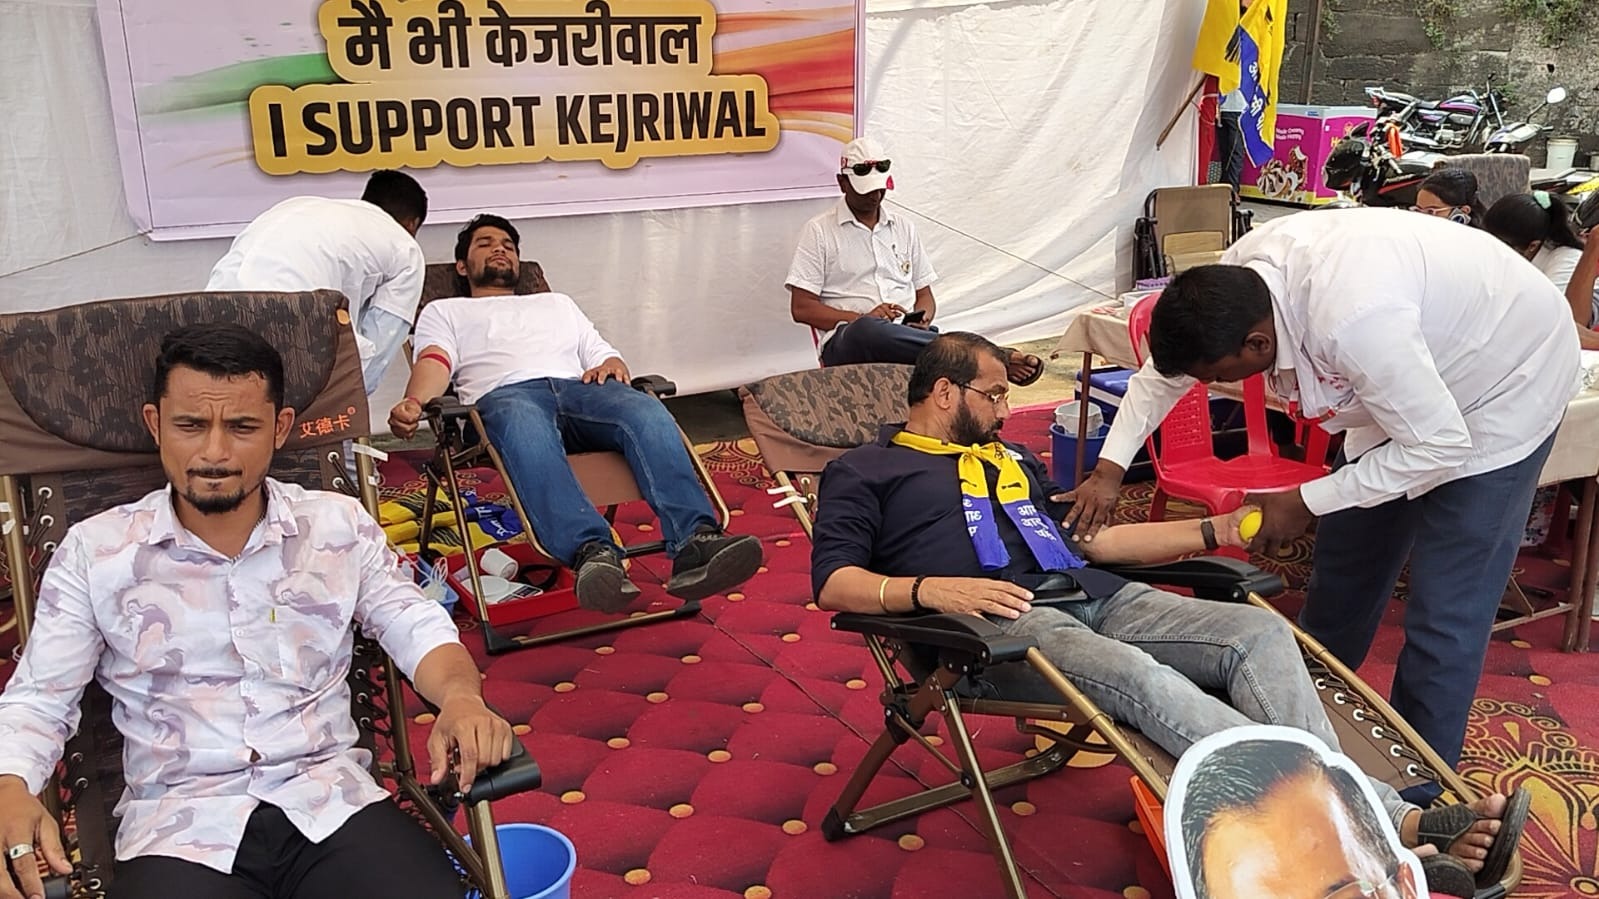 Blood donation by AAP in support of Kejriwal